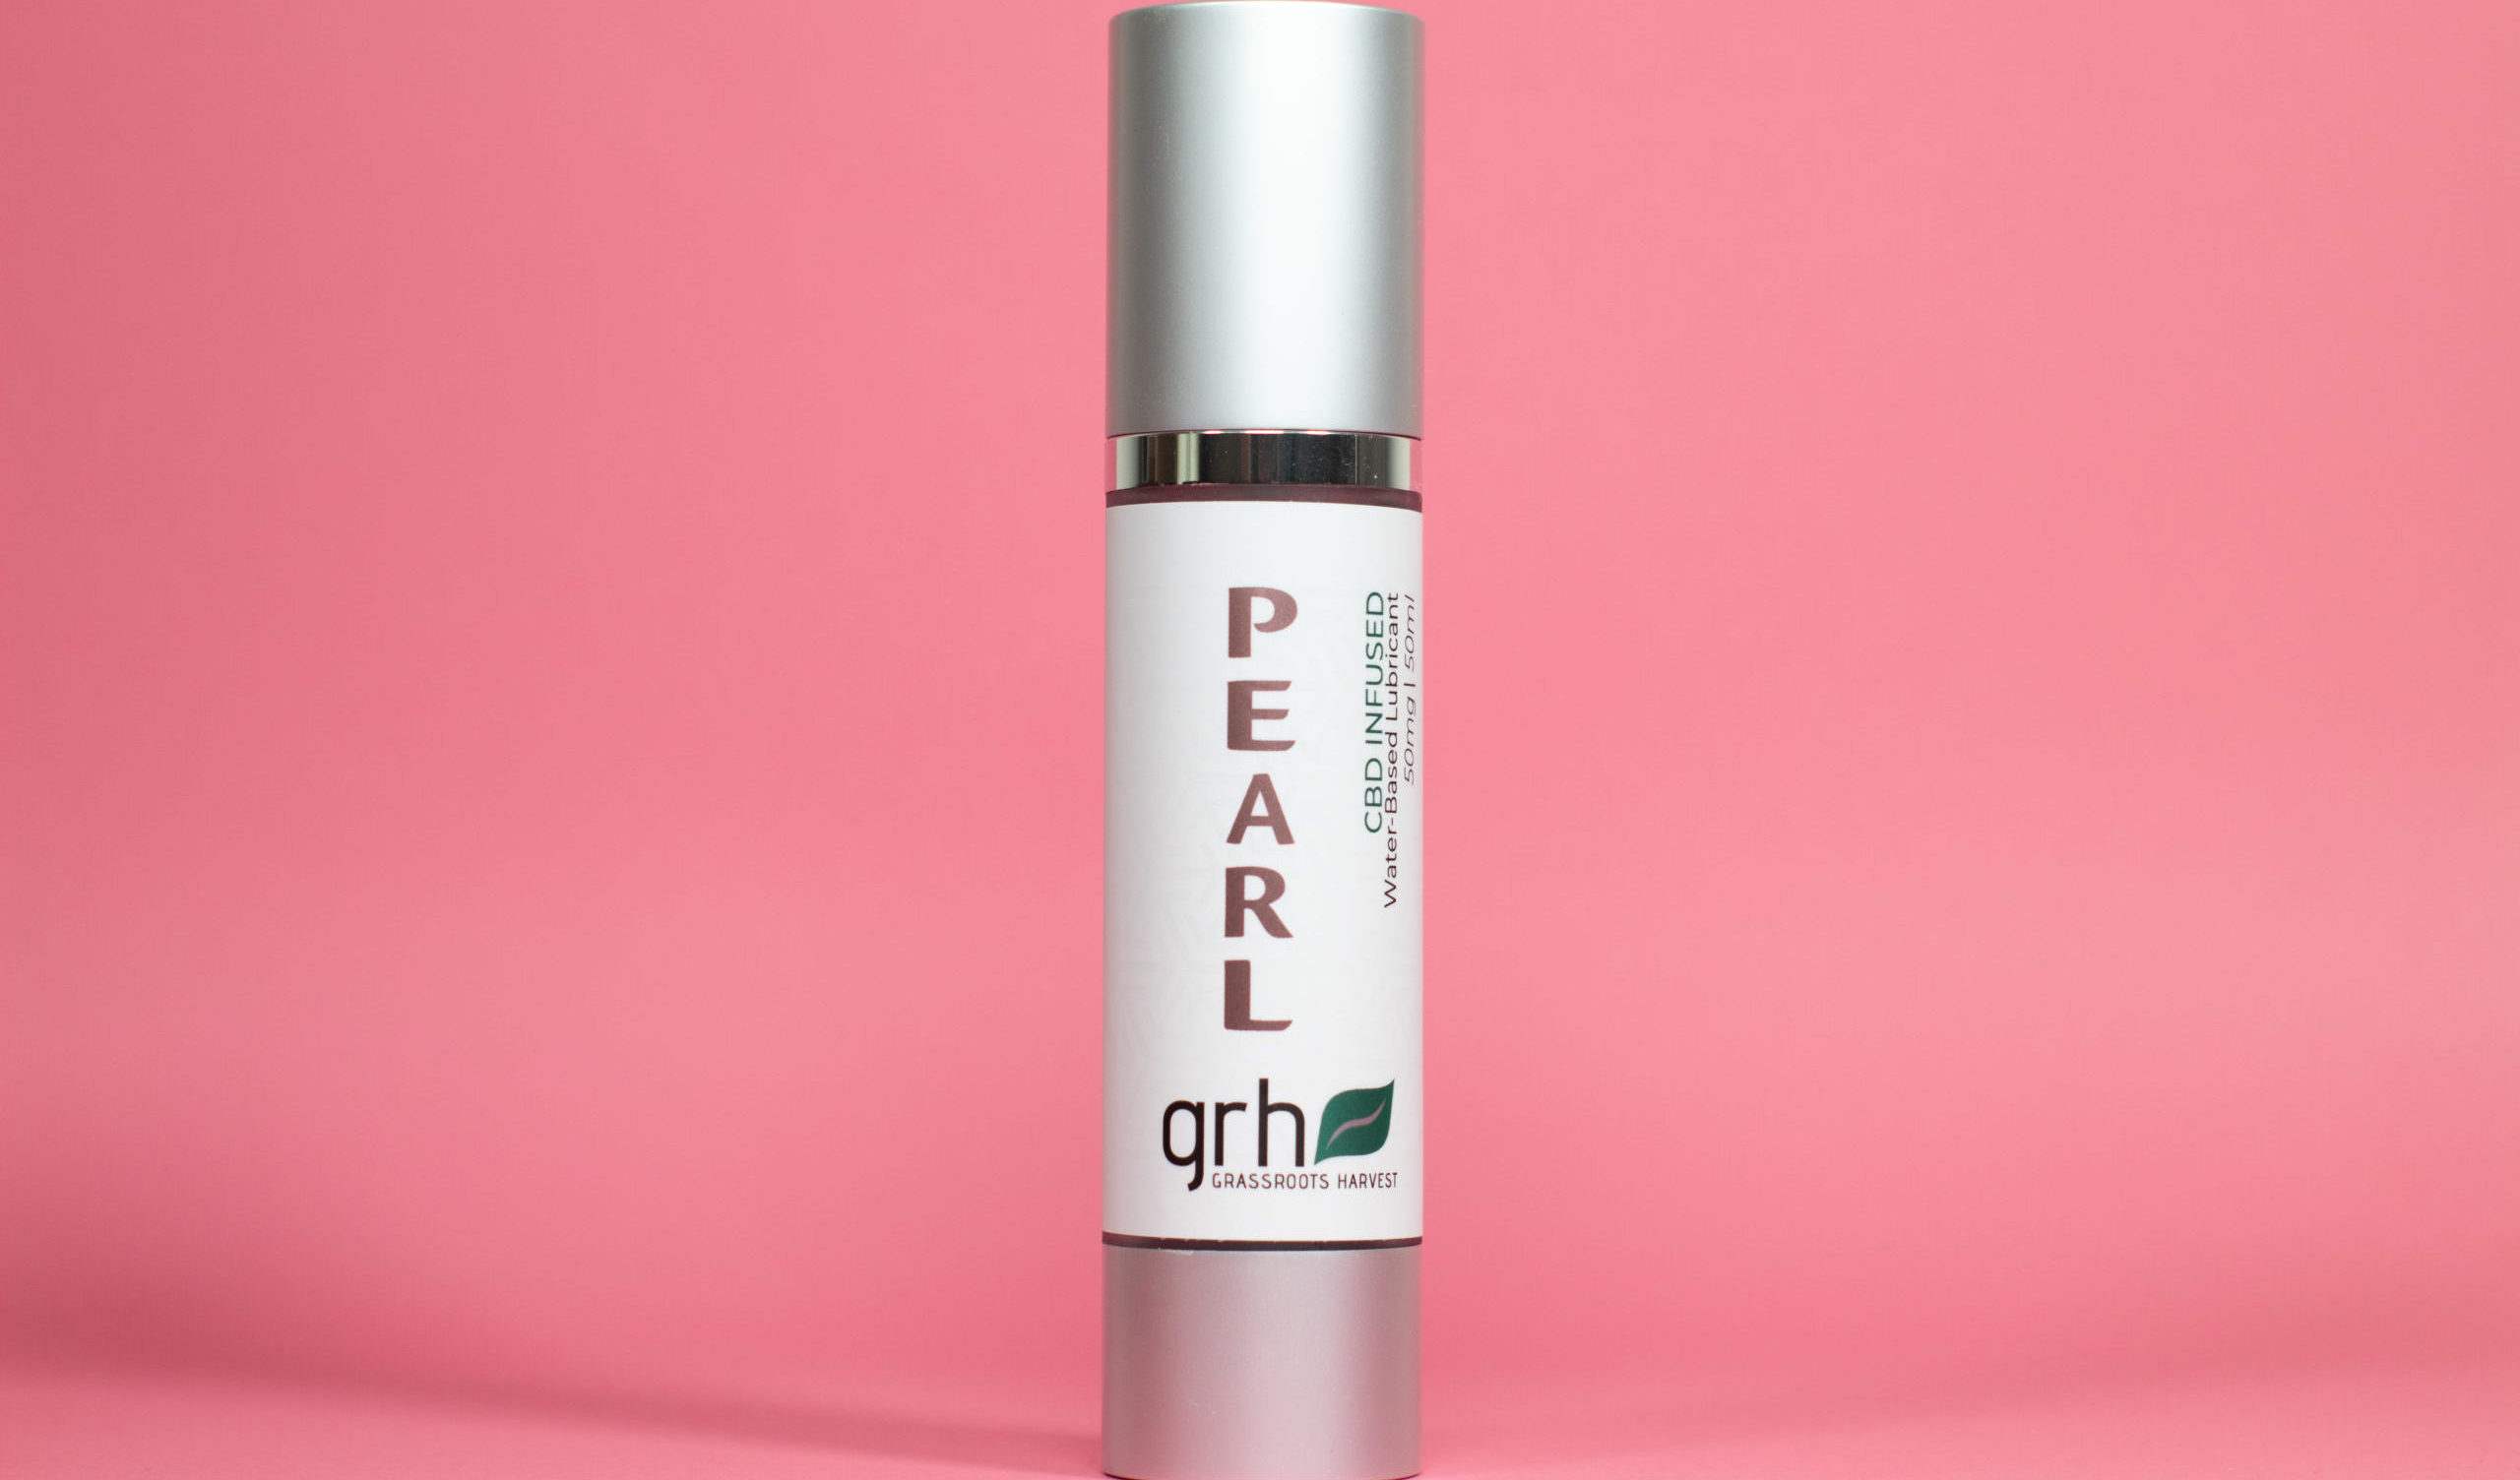 pearl cbd infused personal lubricant on sale valentine's 2022 grassroots harvest